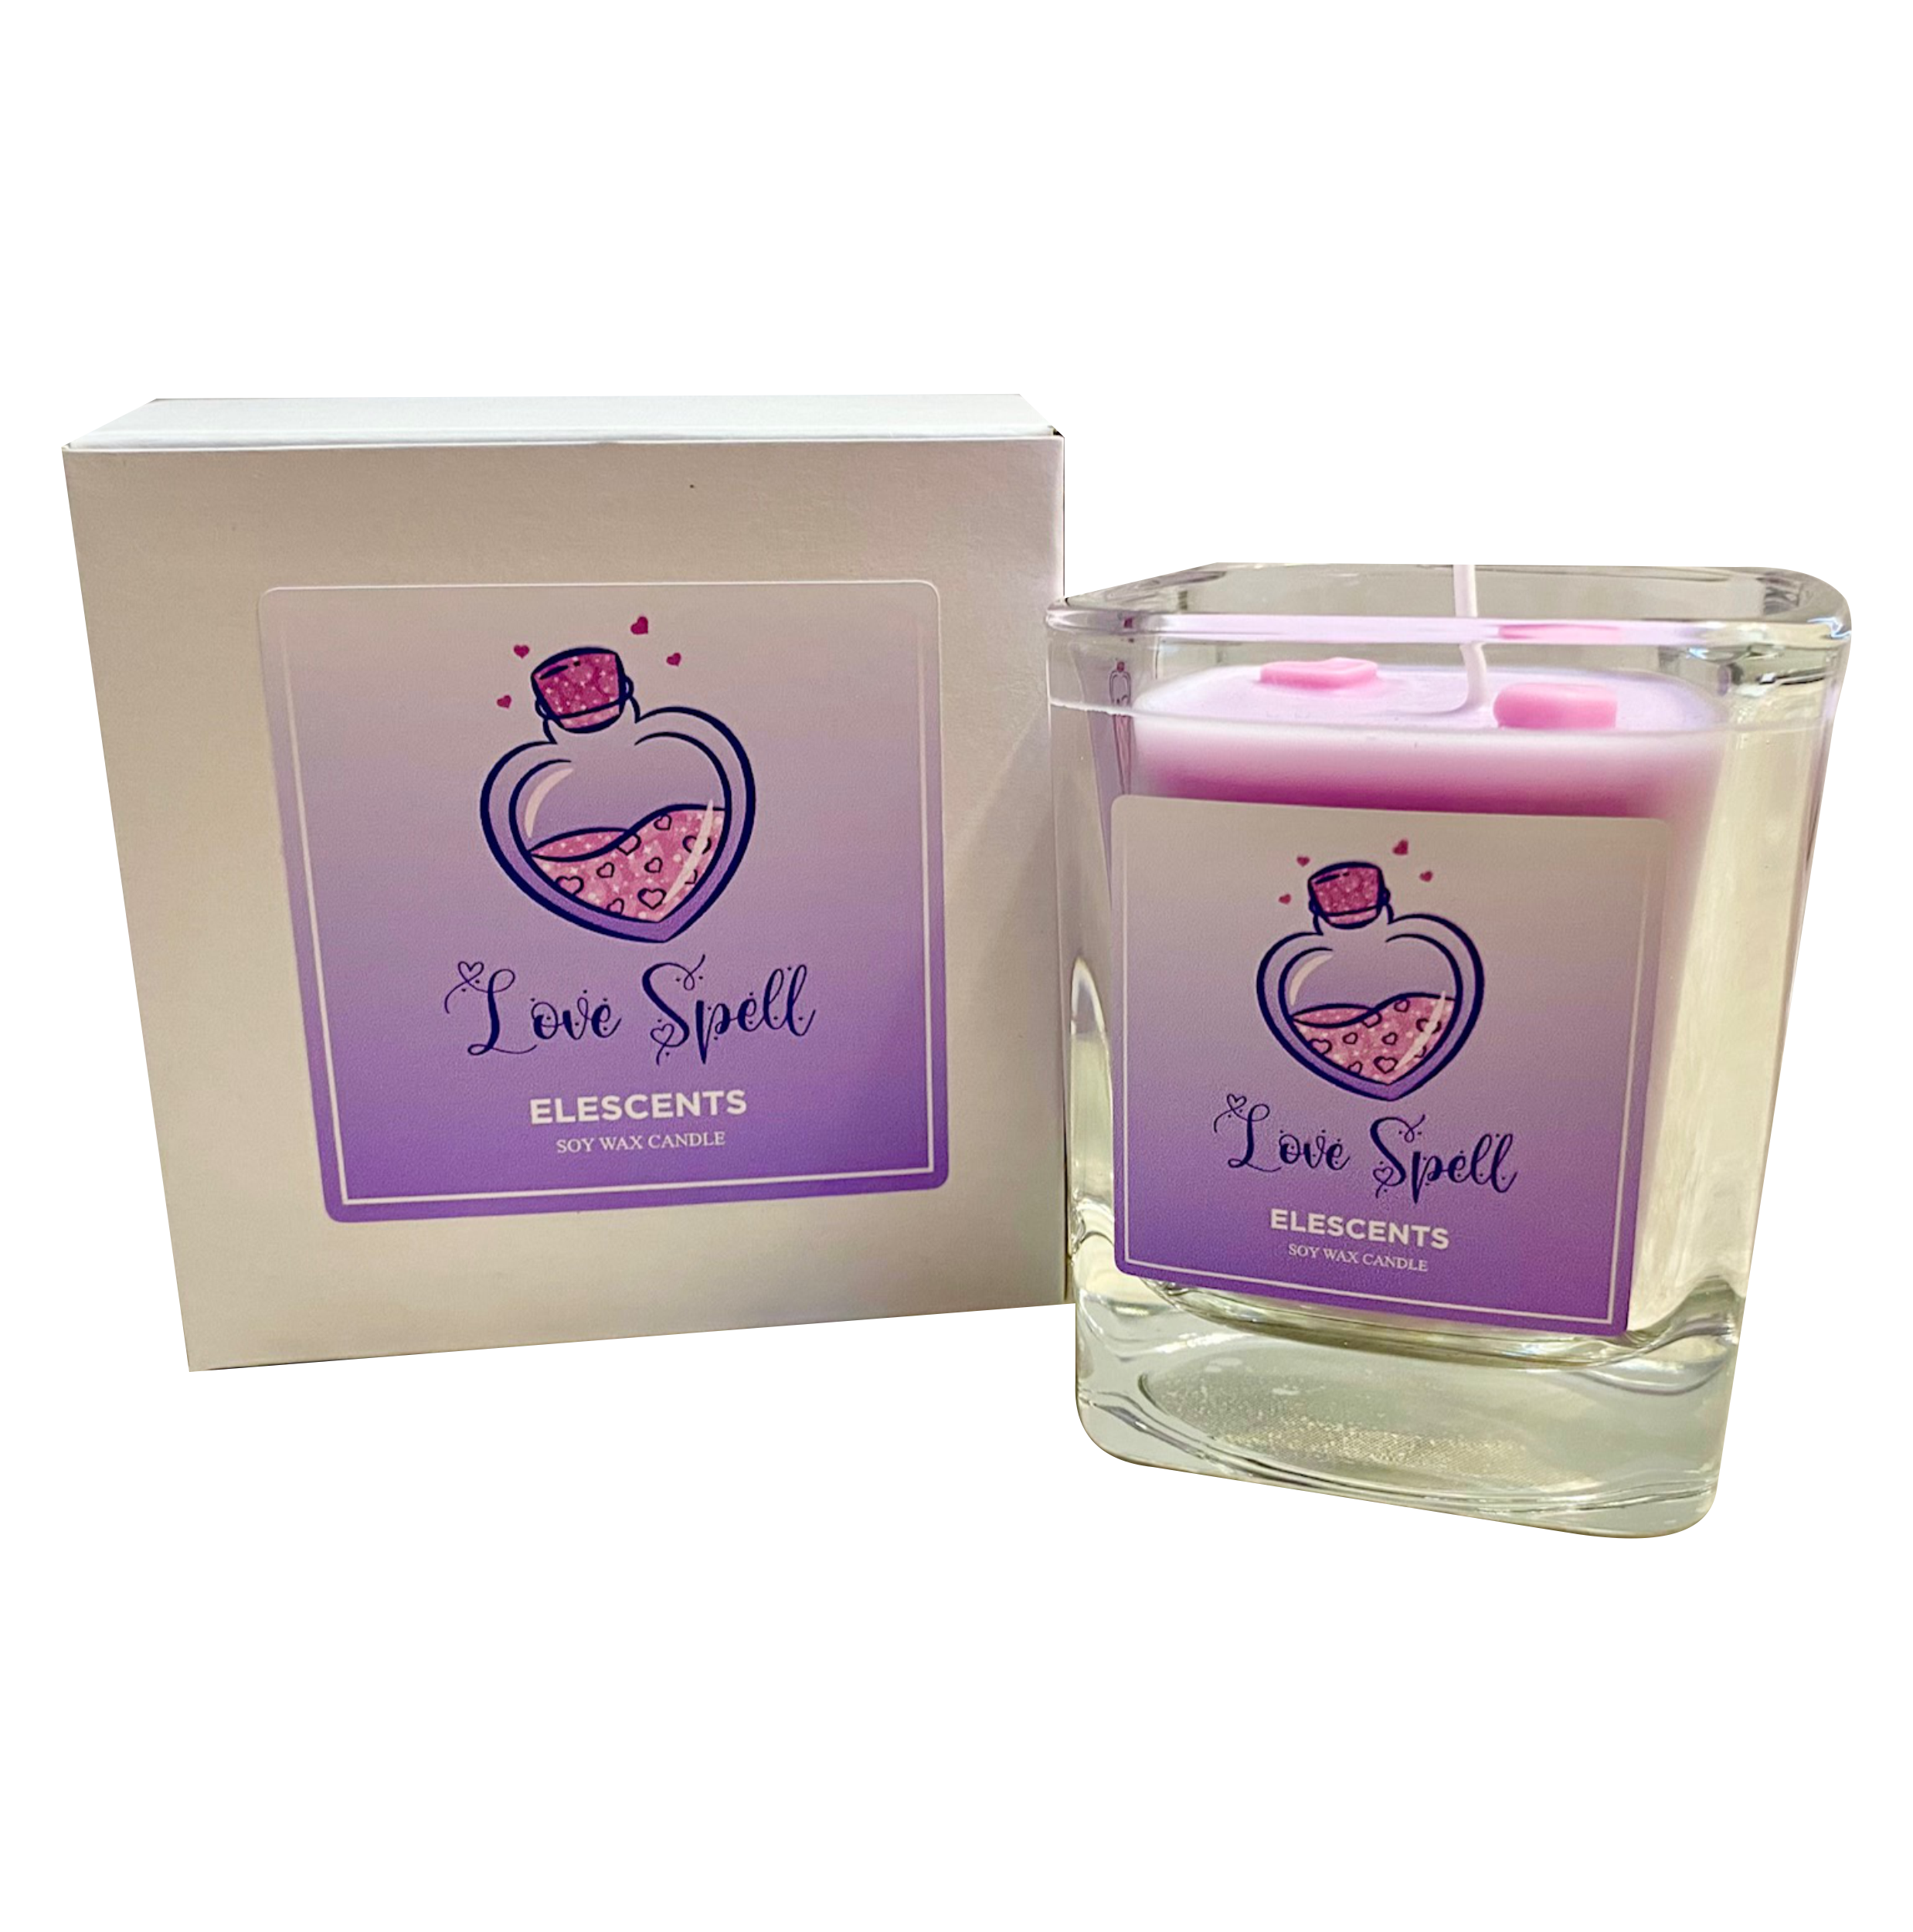 Love Spell – Elescents by Swoo